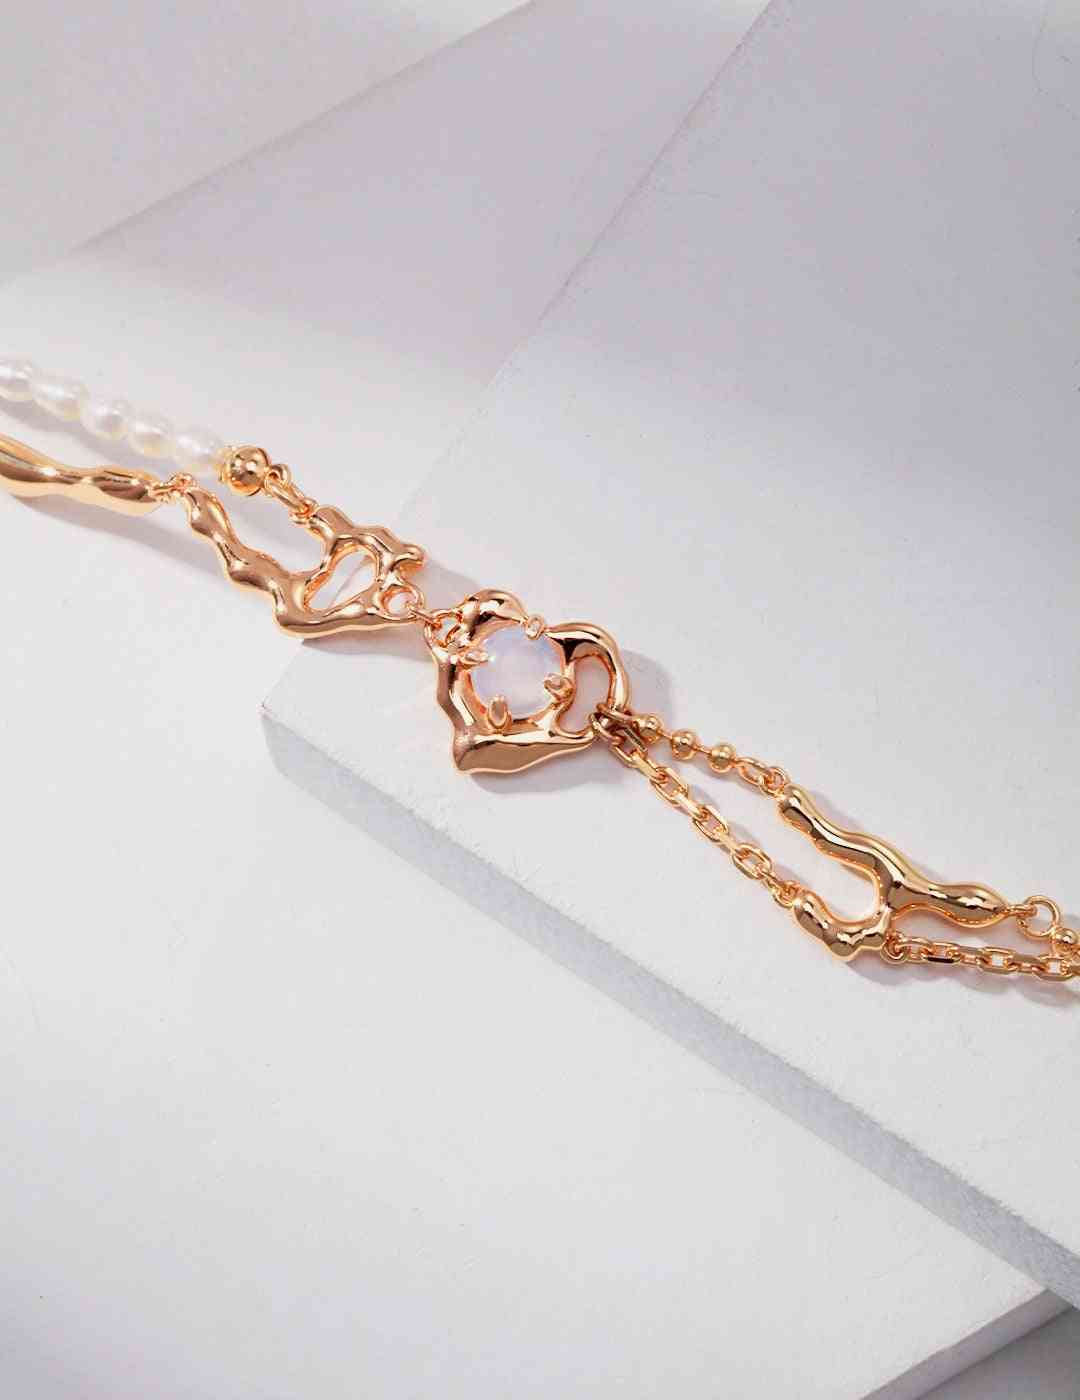 a close up of a gold bracelet with opal stone and pearls